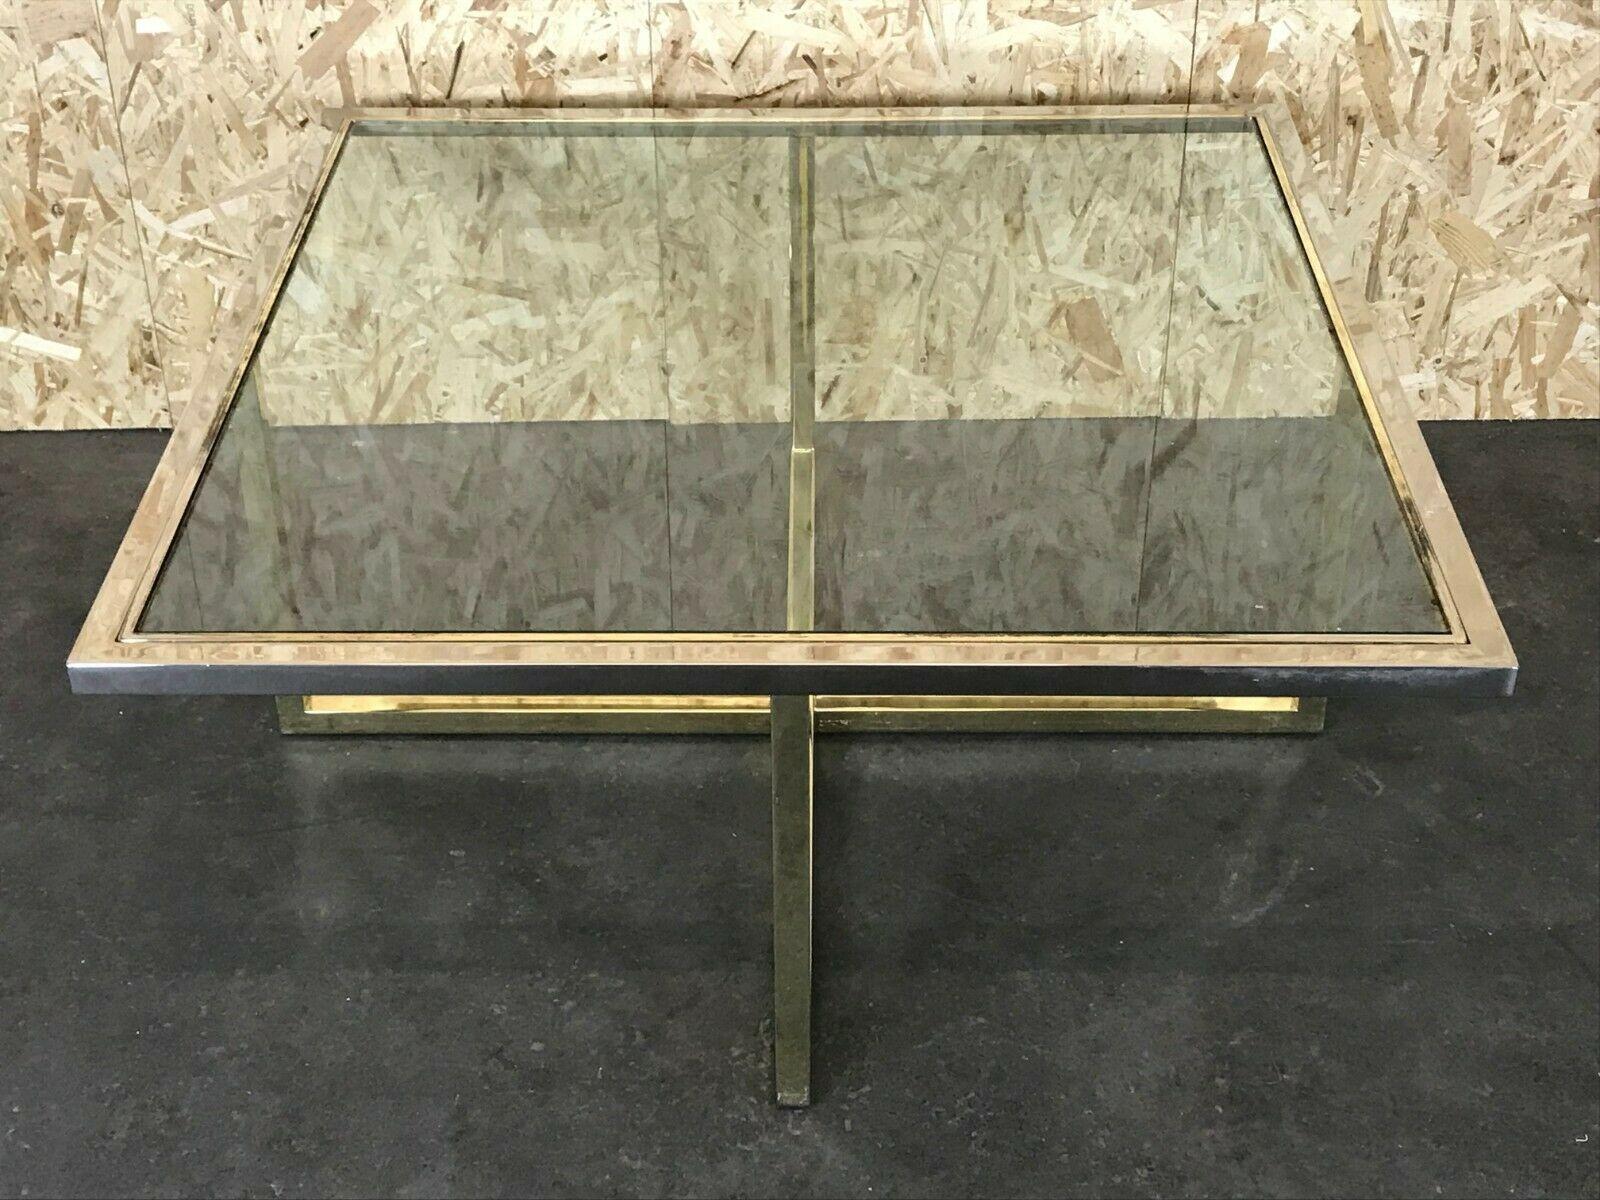 60s 70s Coffee Table in Brass and Chrome Coffee Table Coffee Table Design 60s 70s

Object: coffee table

Manufacturer:

Condition: good

Age: around 1960-1970

Dimensions:

108cm x 108cm x 47cm

Other notes:

The pictures serve as